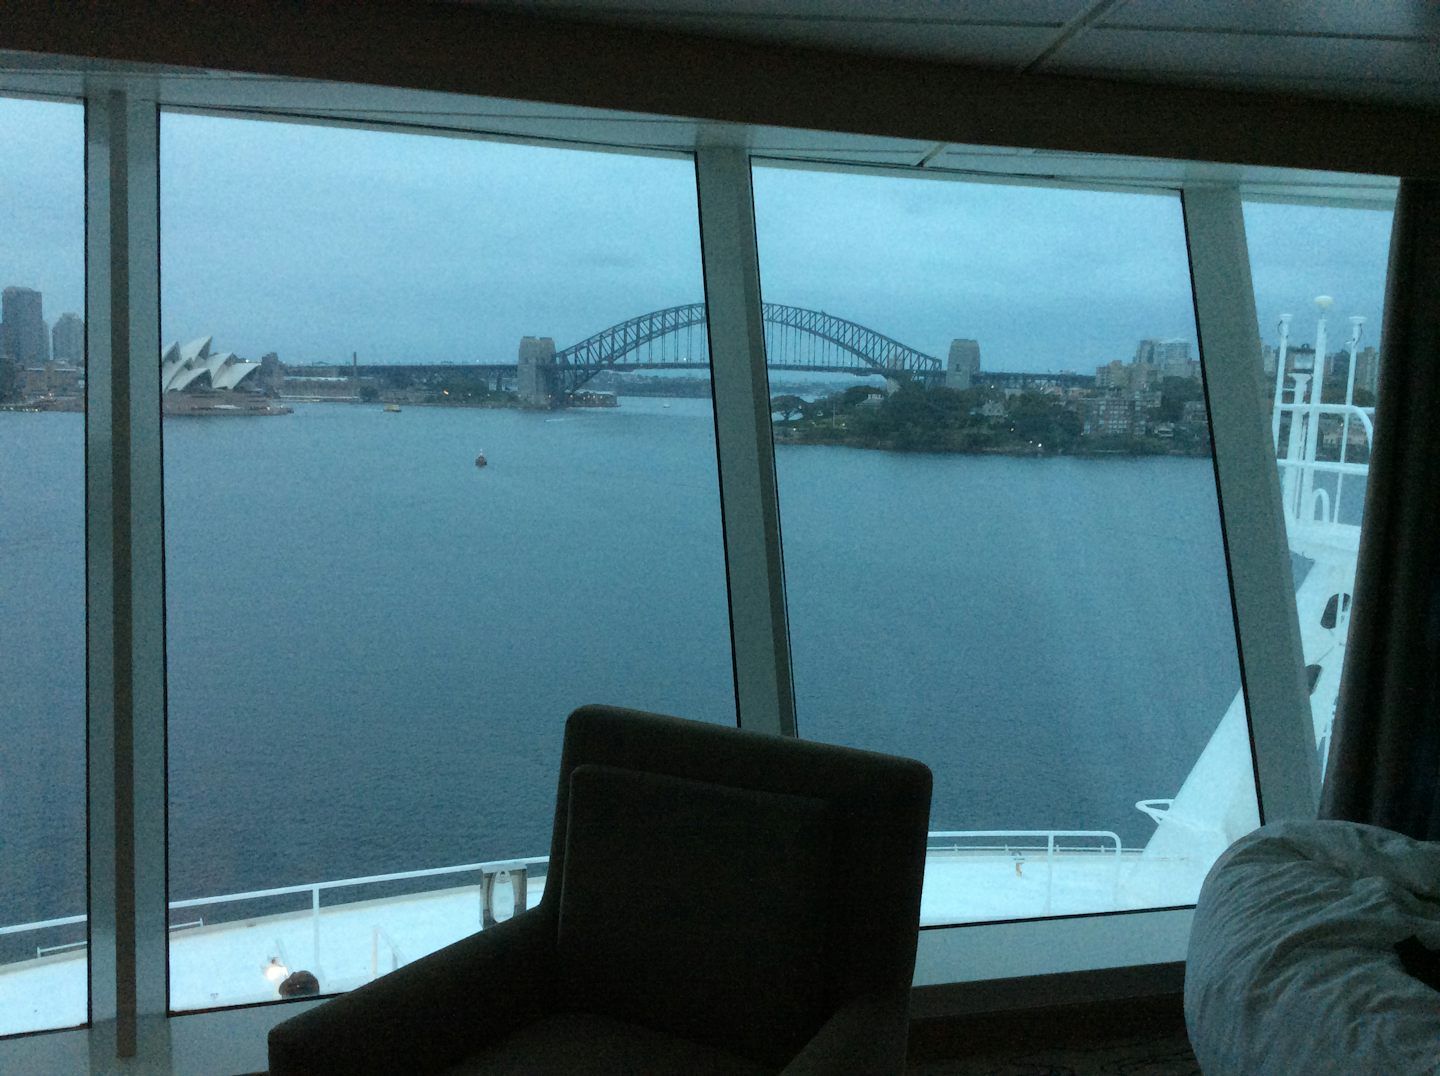 View from our cabin coming into Sydney Harbour